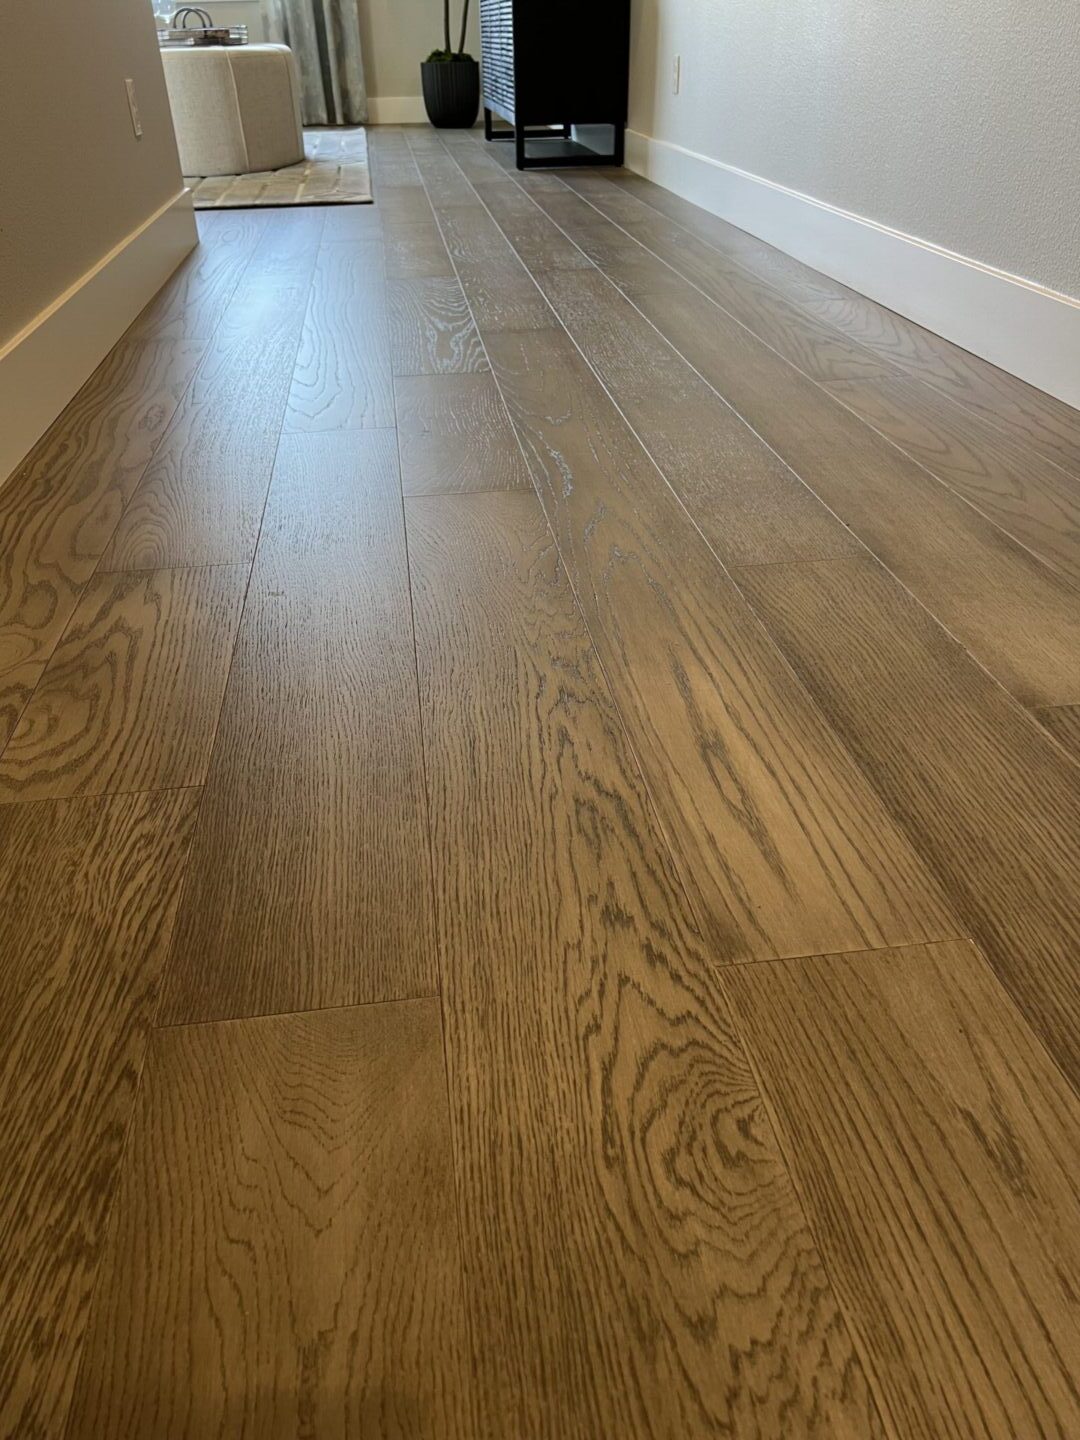 A wooden floor with some light wood on it